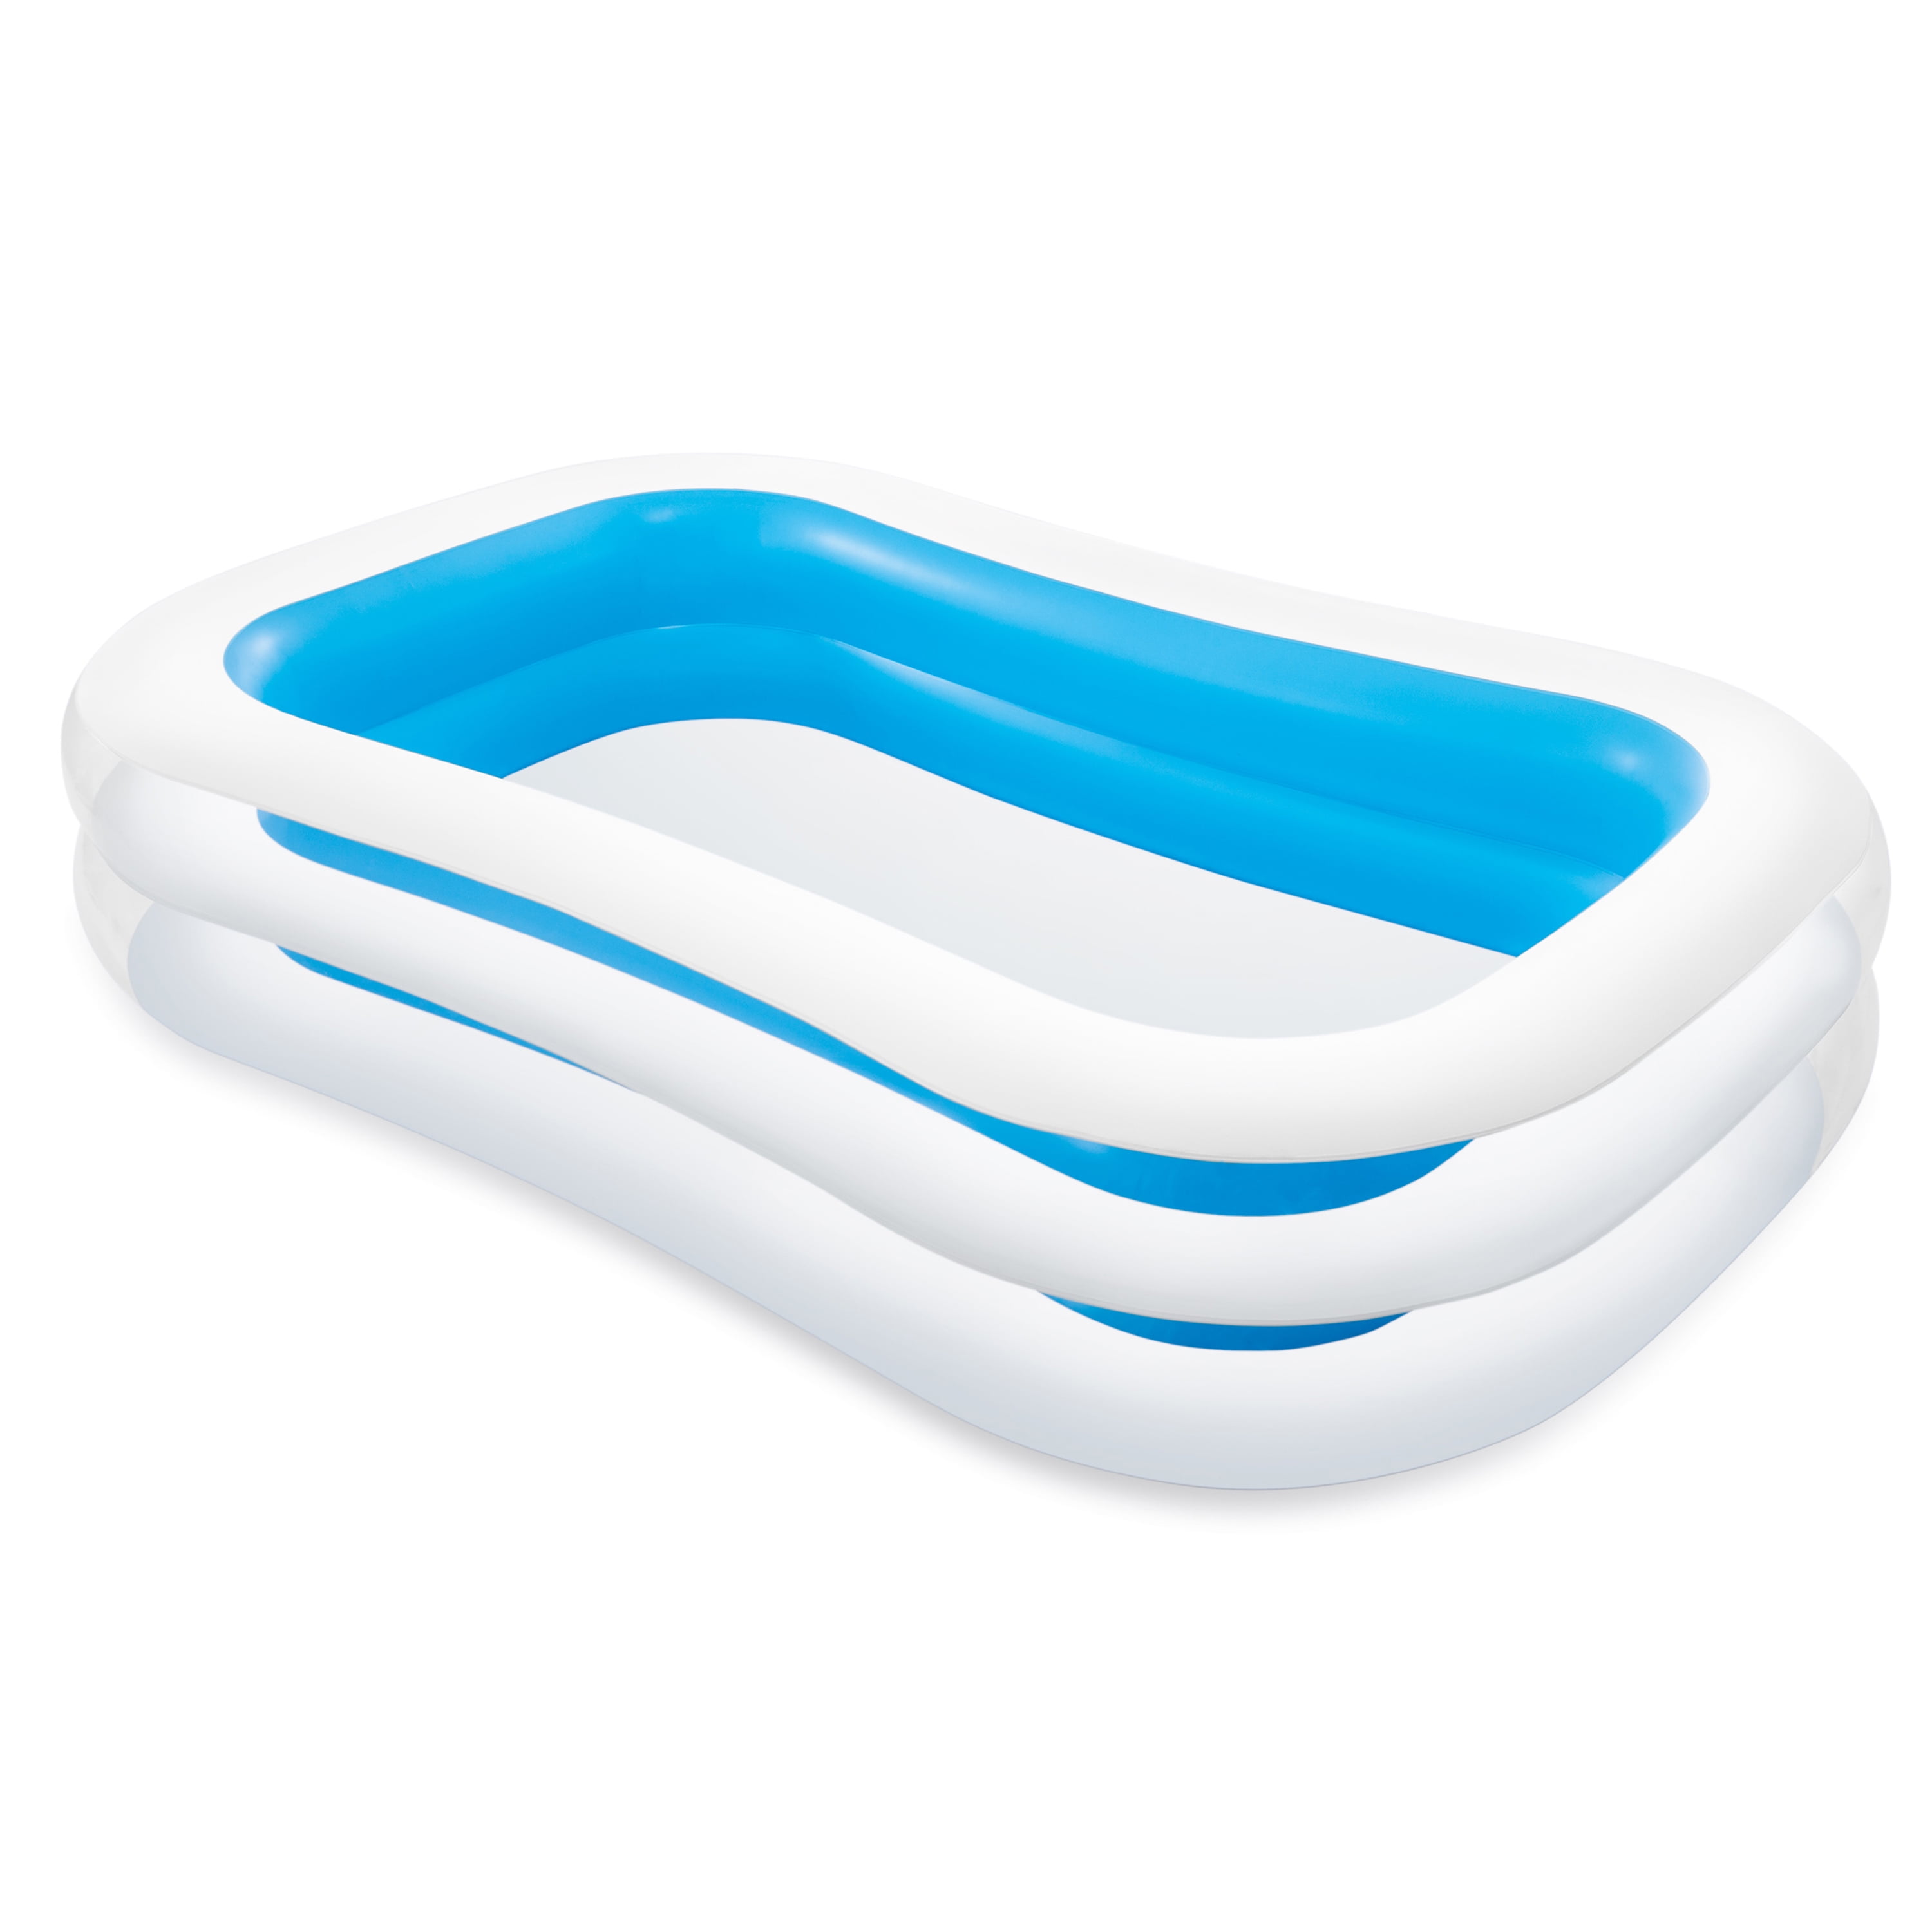 Play Day Square Inflatable Deluxe Comfort Family Pool, Blue, Ages 